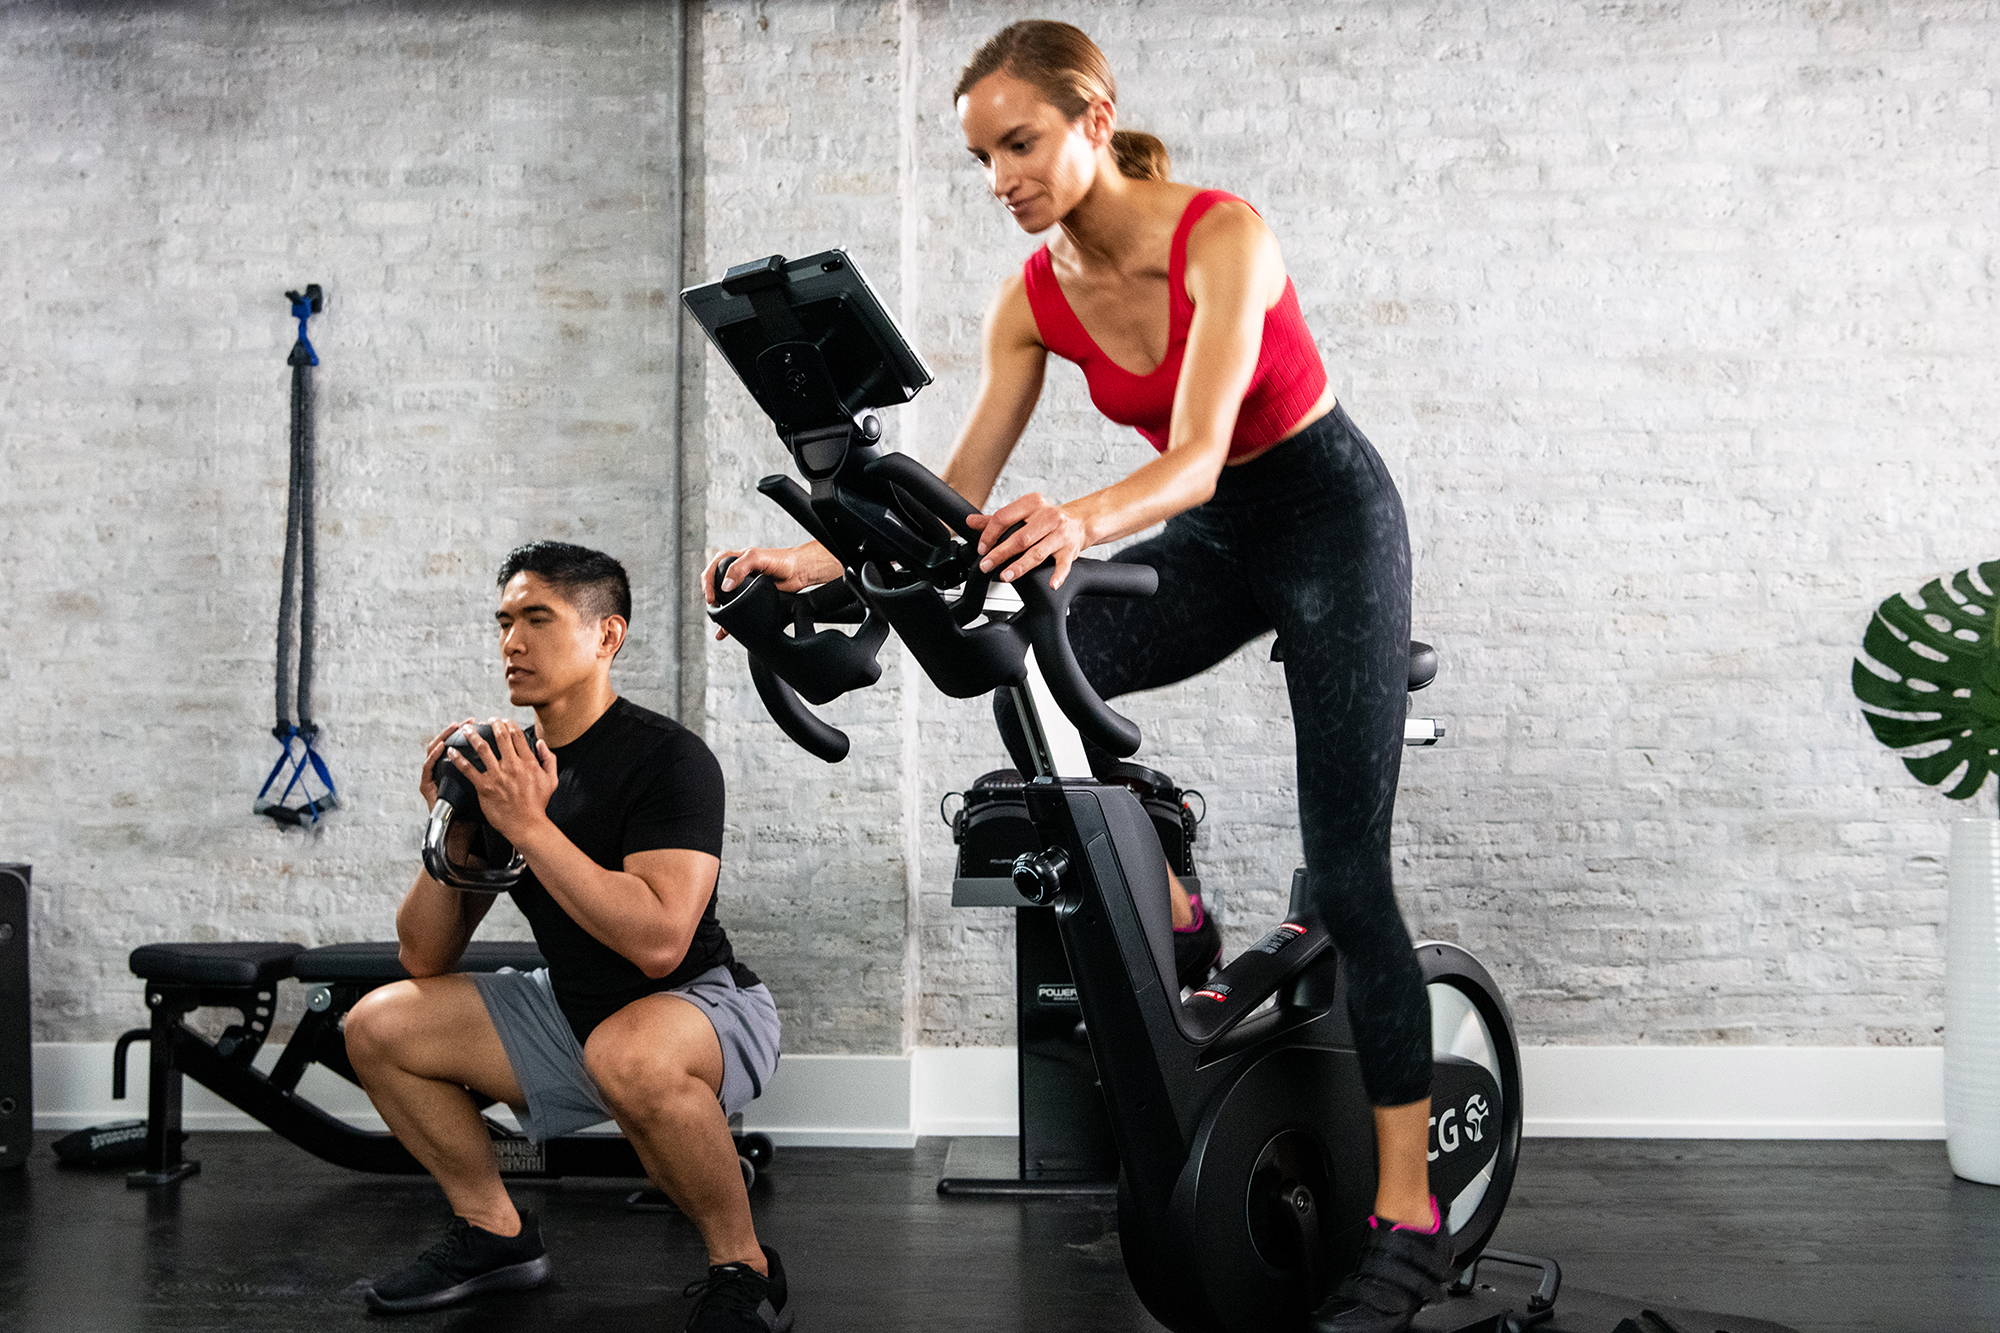 Female riding Ride CX with man exercising next to her at home